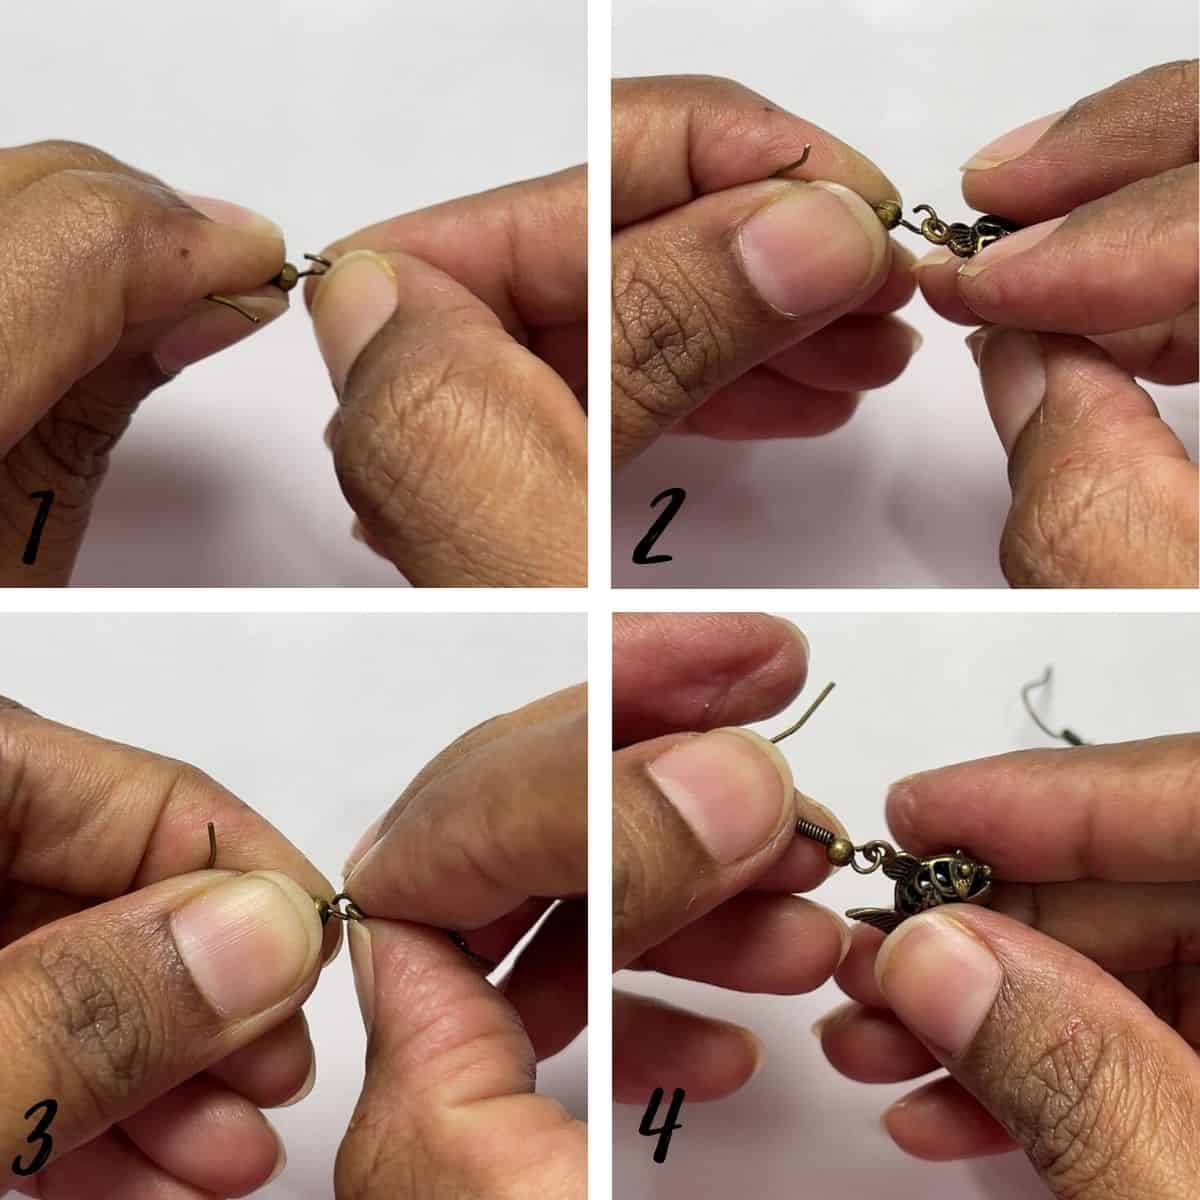 A poster of 4 images showing how to make earrings for beginners without tools.